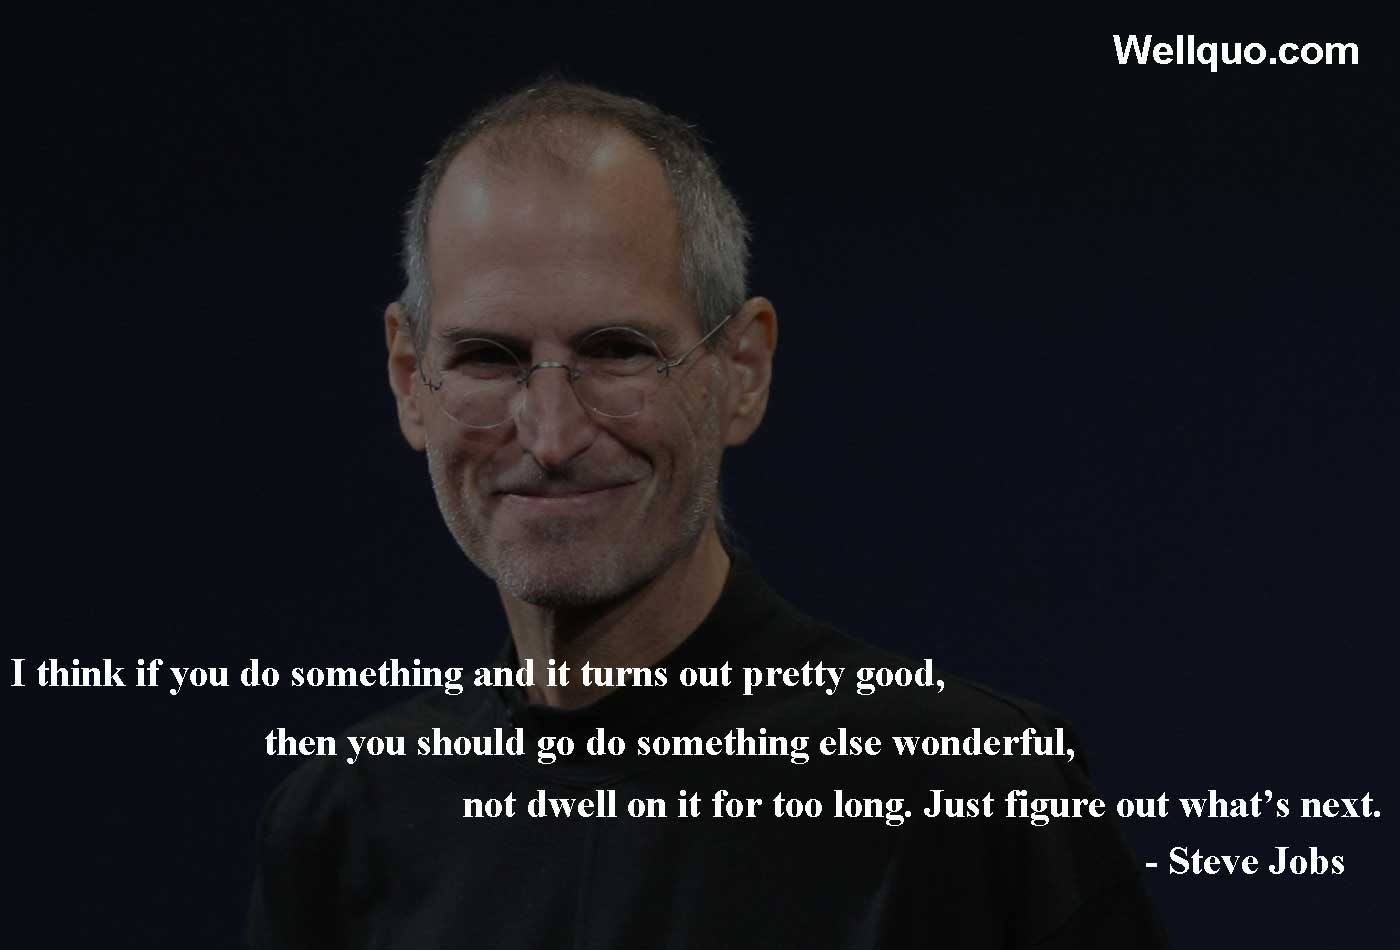 Steve jobs quotes images